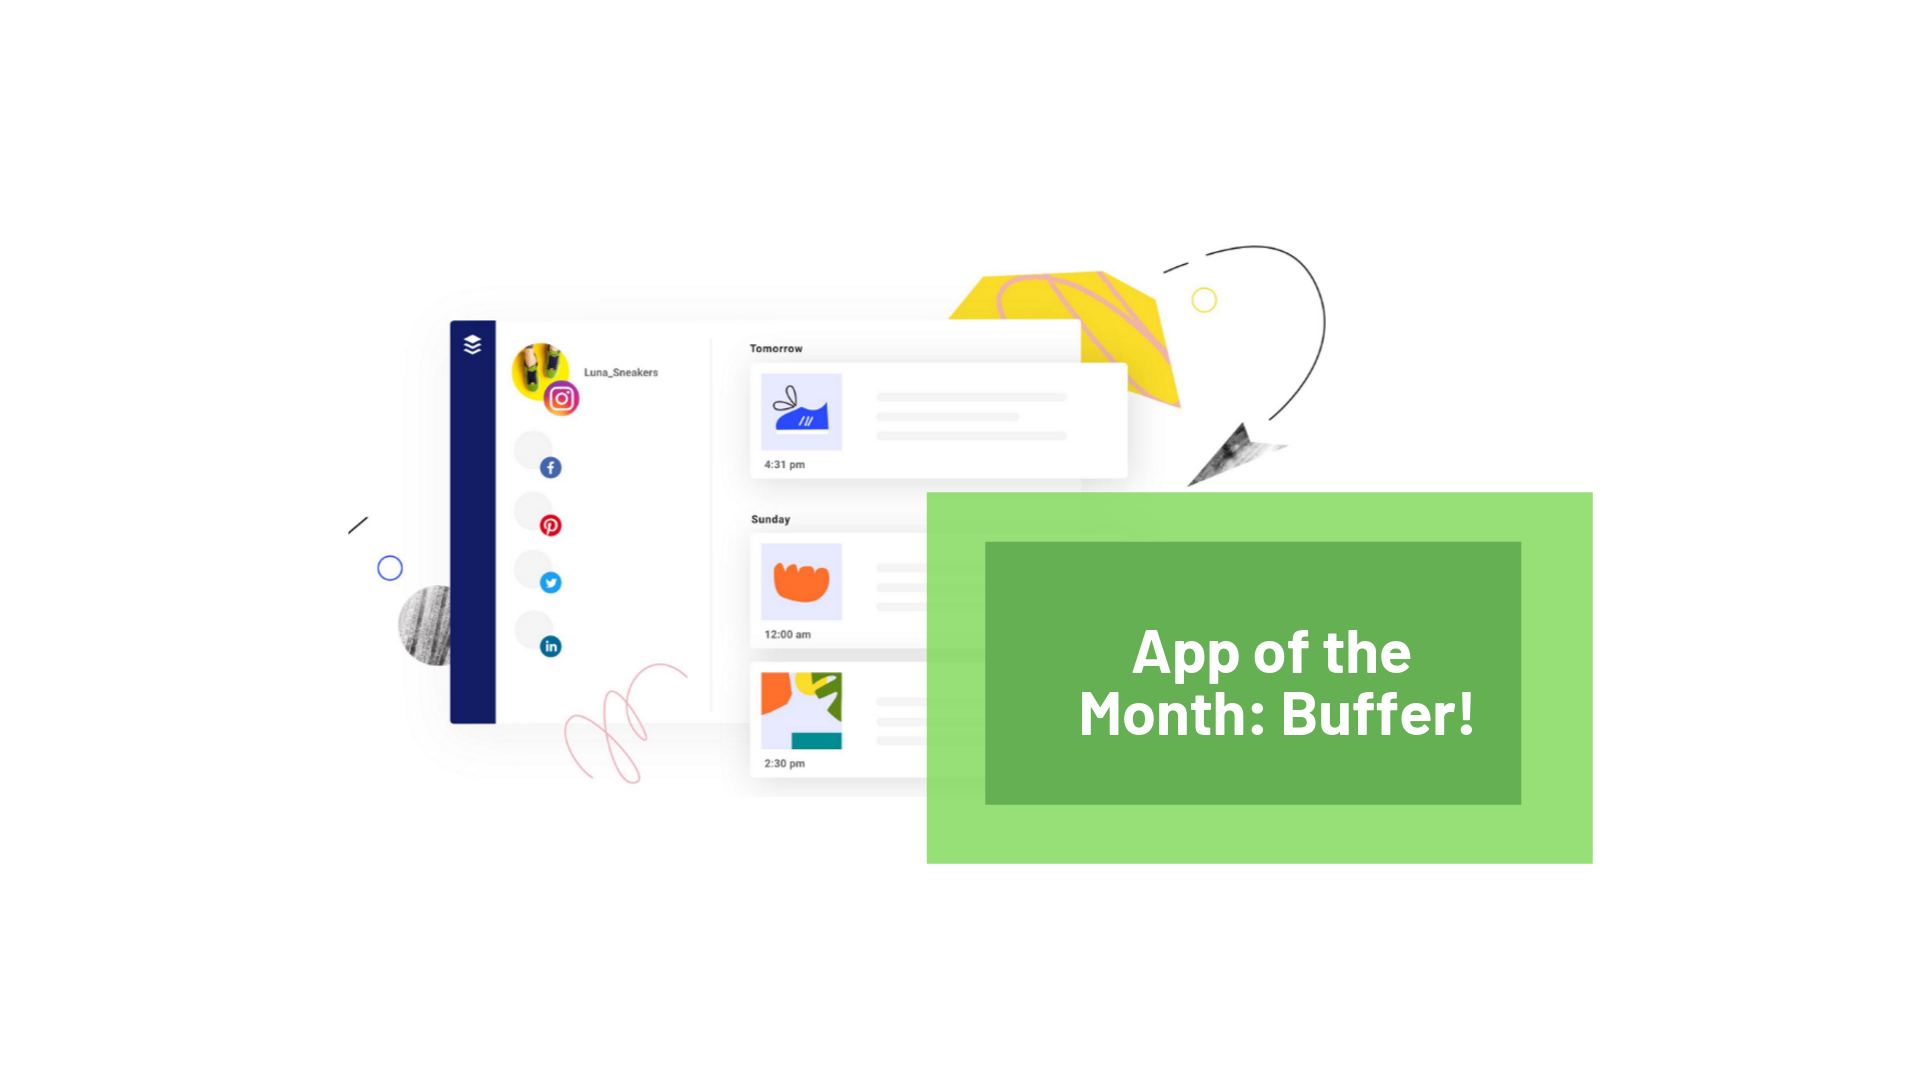 Our Favorite App of the Month: Buffer!